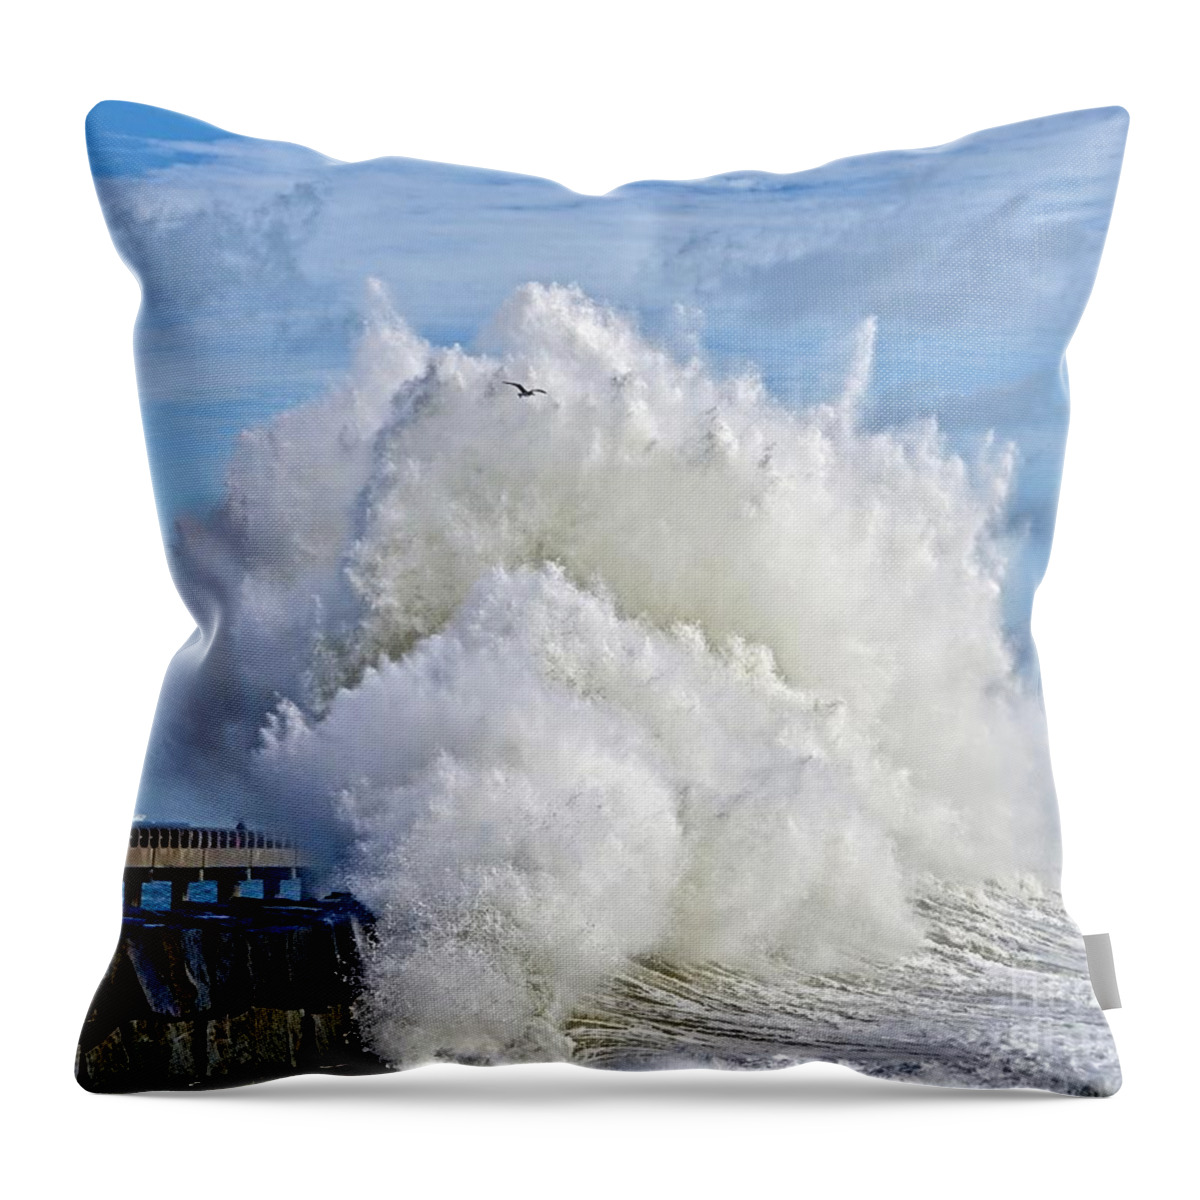 Breakwater Throw Pillow featuring the photograph Breakwater Explosion by Michael Cinnamond